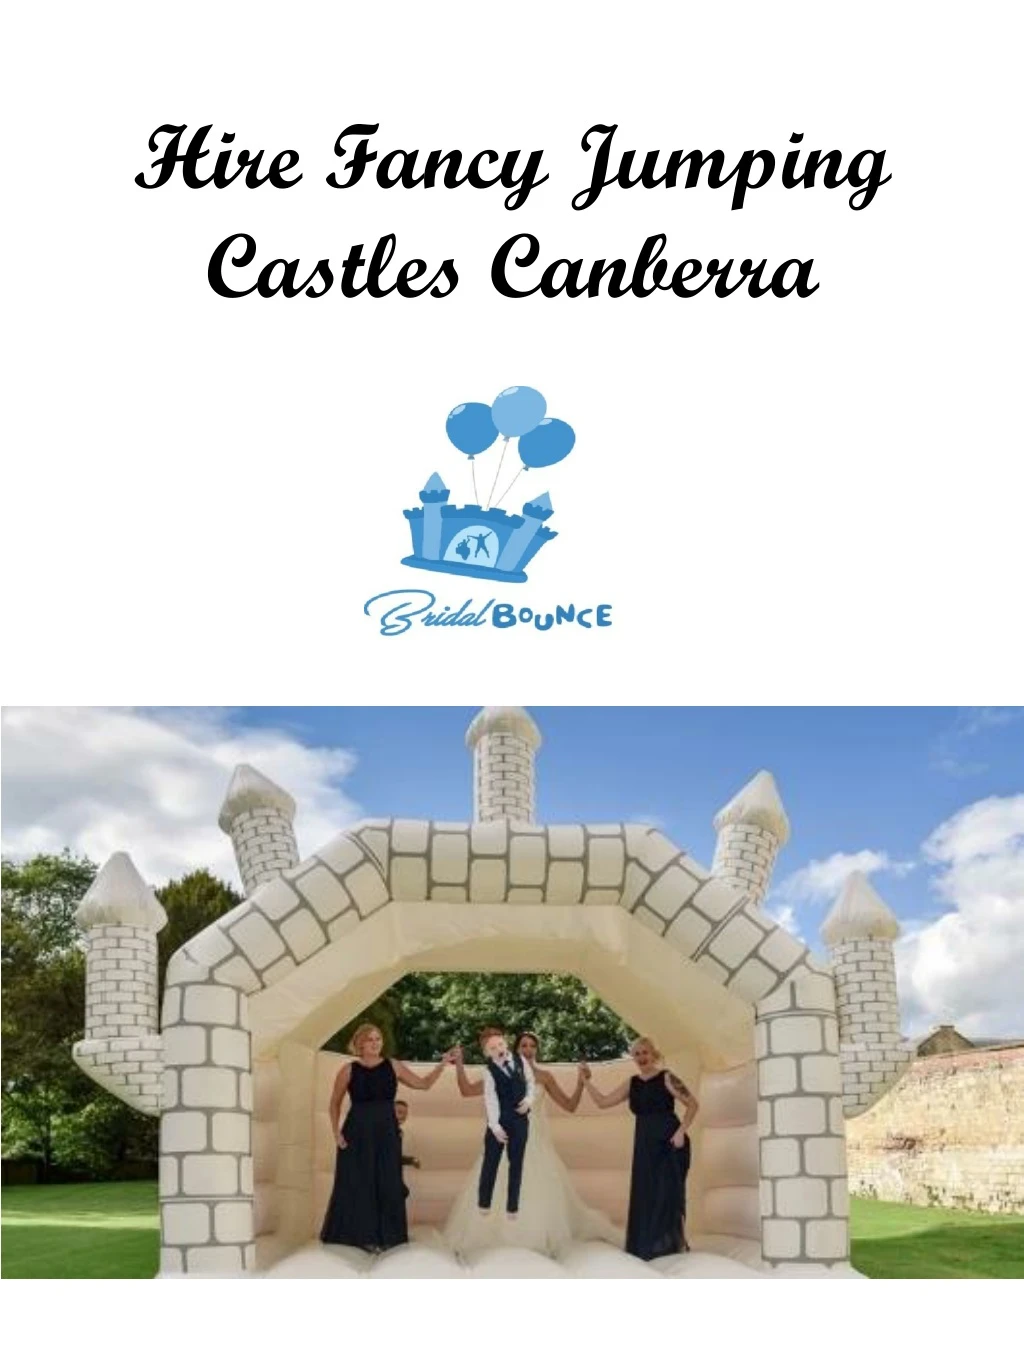 hire fancy jumping castles canberra